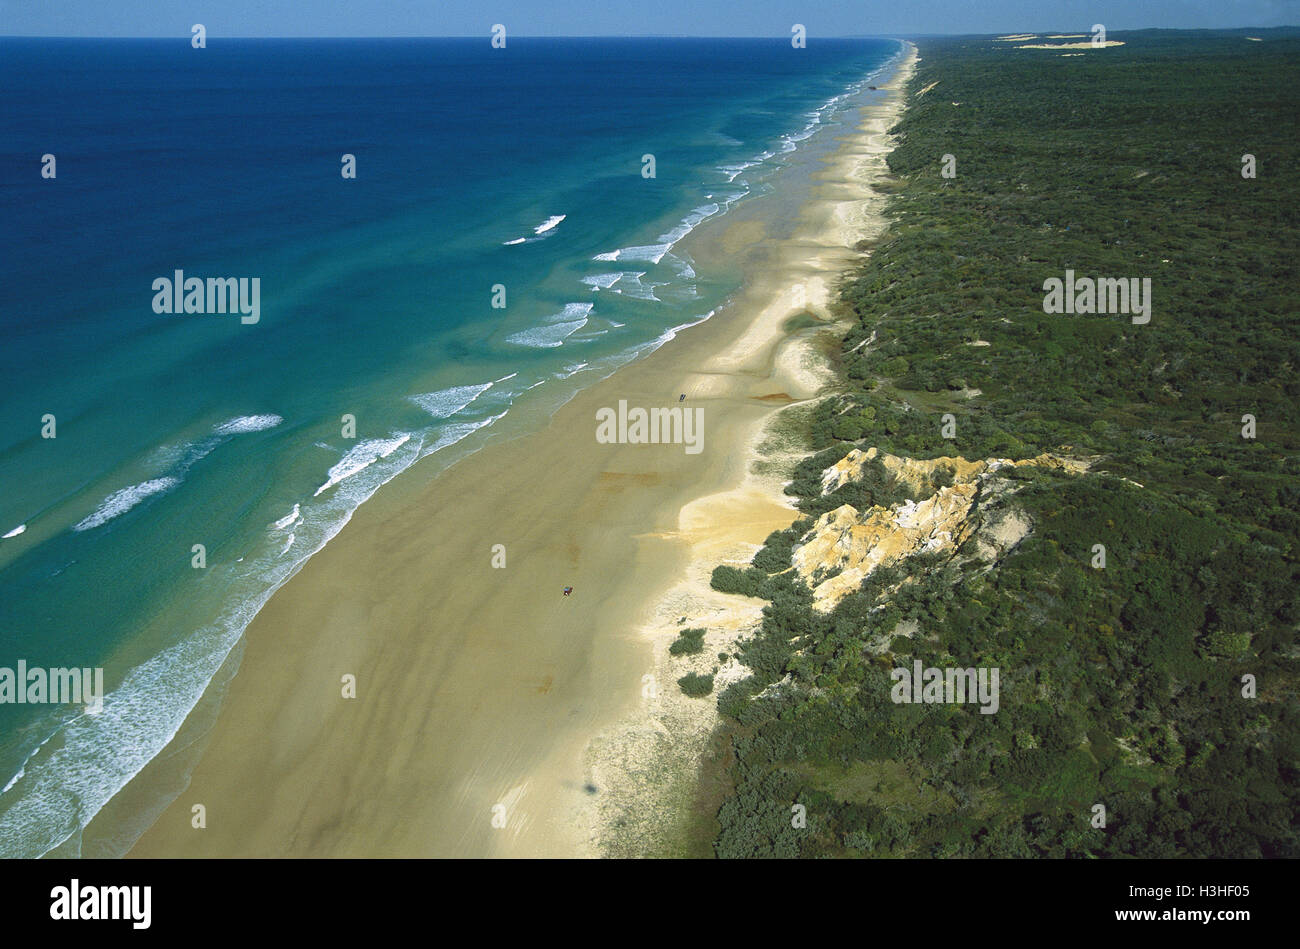 Aerial photograph of Seventy-Five Mile Beach, Stock Photo